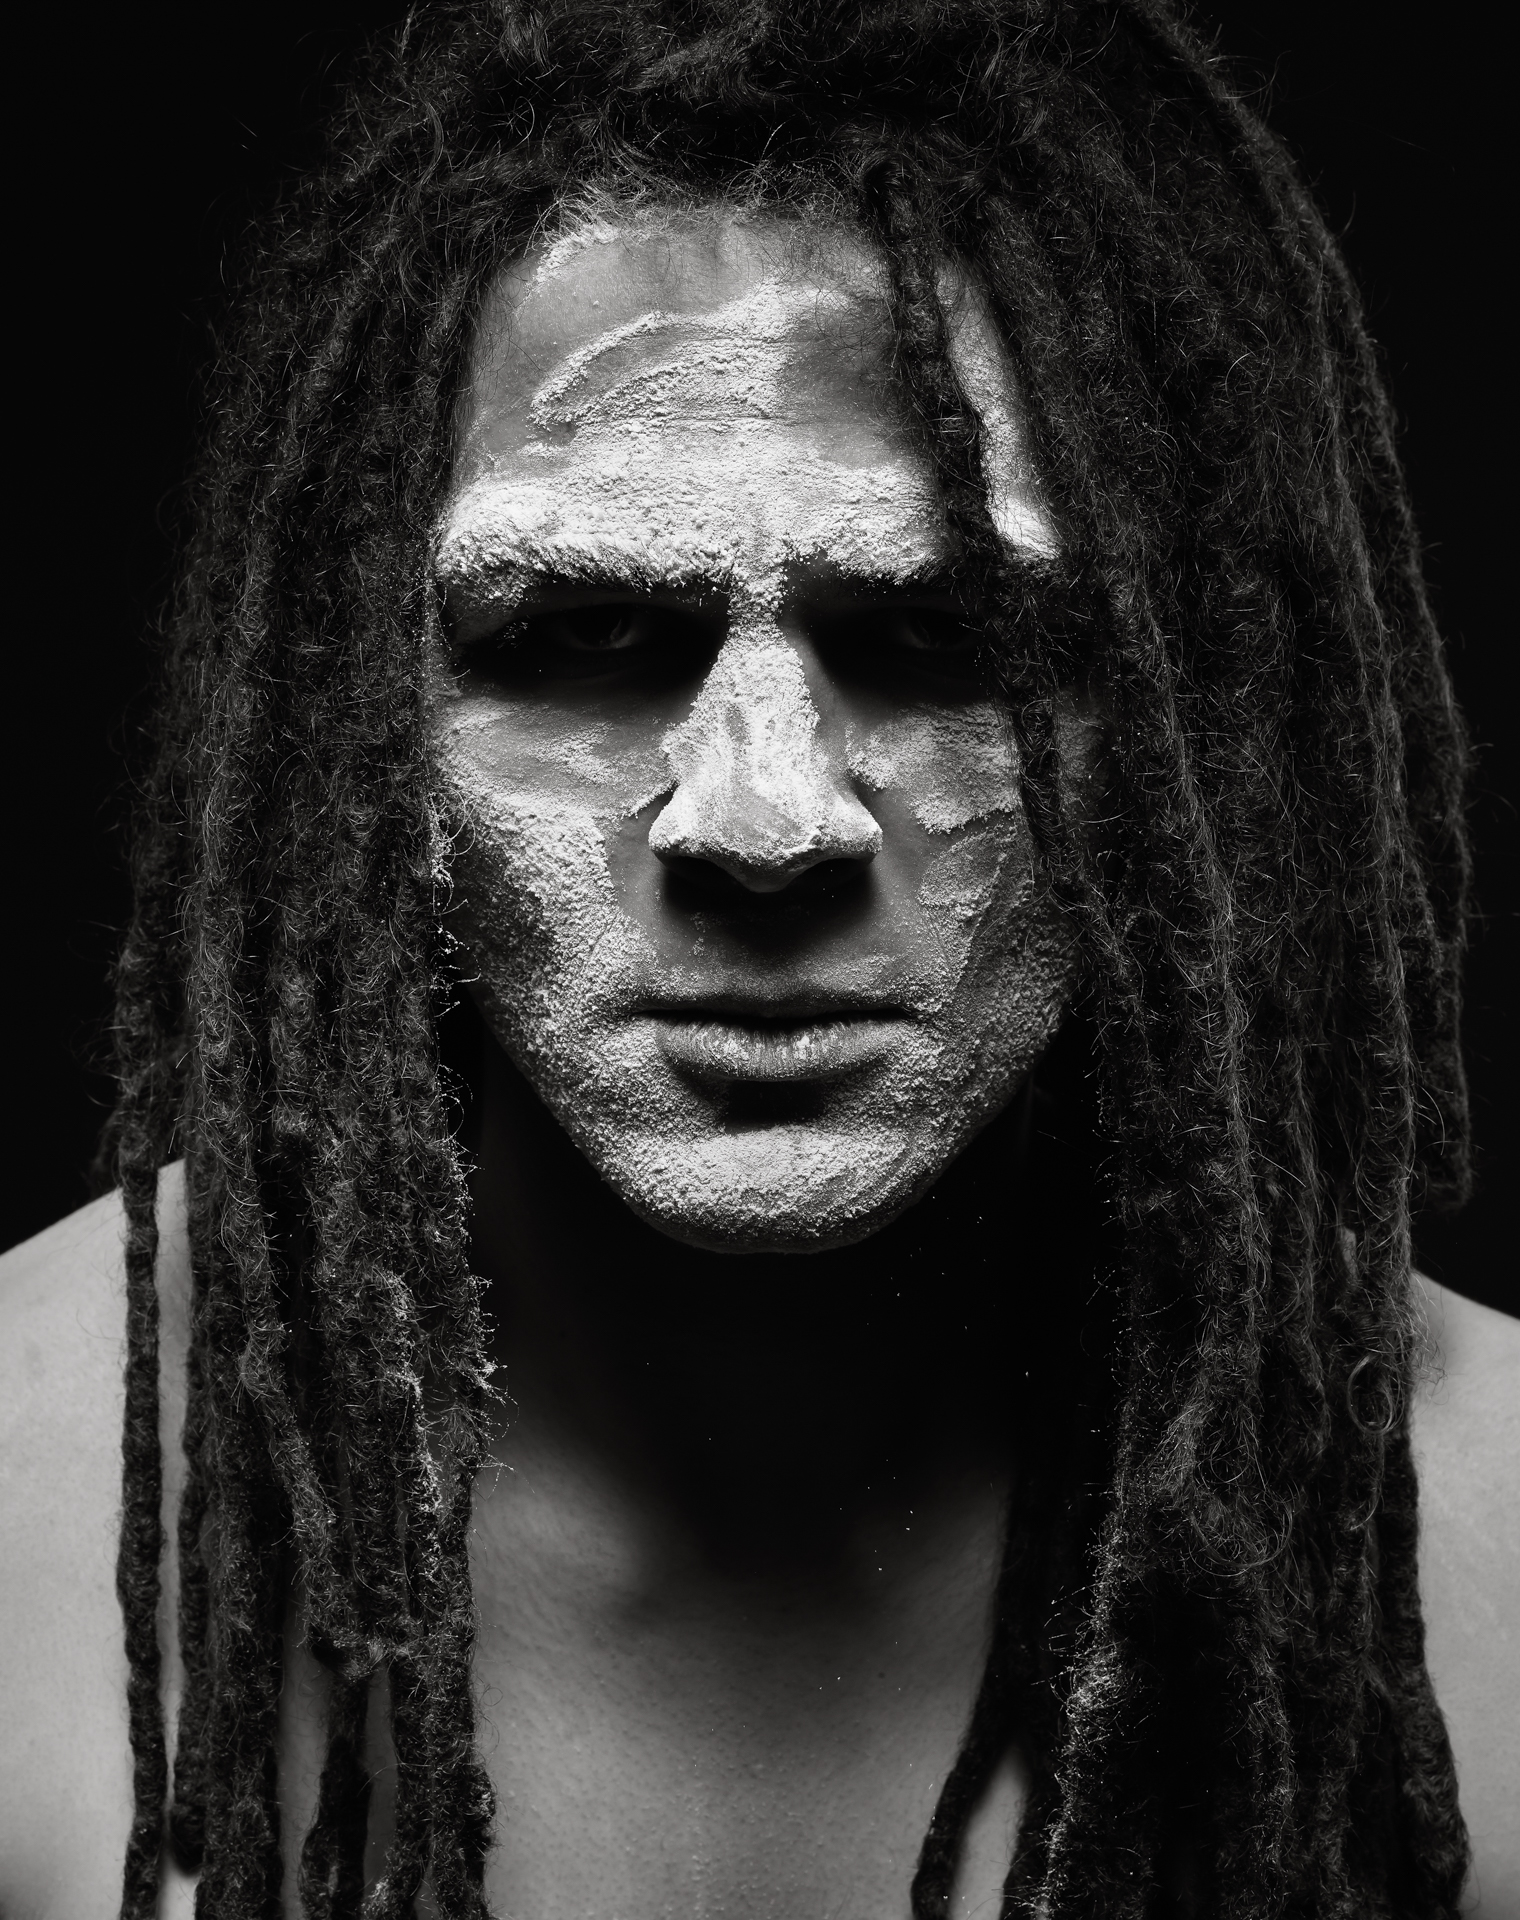 A man with long hair in dreadlocks is facing the camera head on, gazing into the lens. His face is covered with a white powder as some falls off his face the moment the photo was taken.